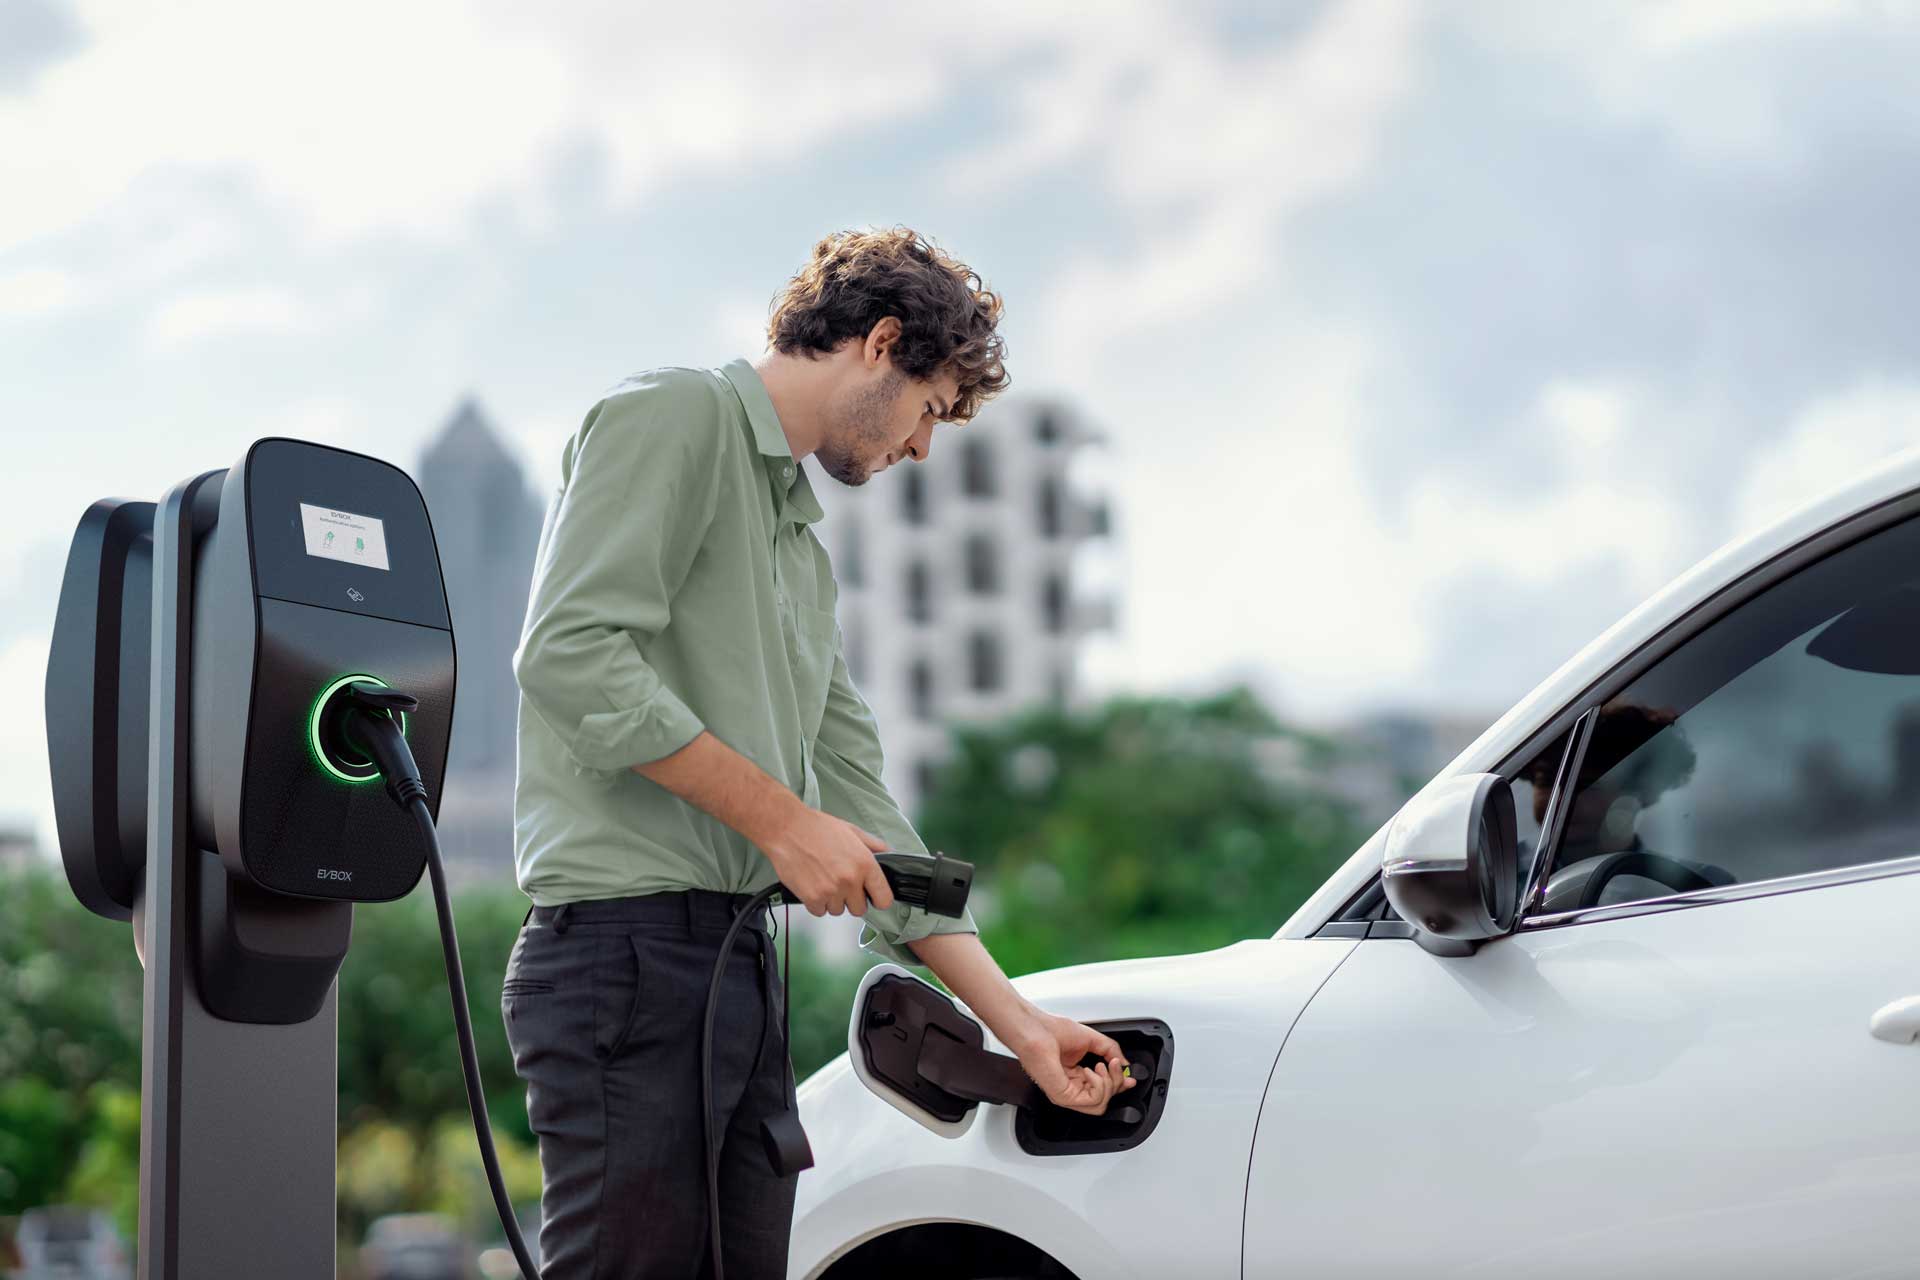 A man using a public EVBox Liviqo AC charging station to charge his electric car.